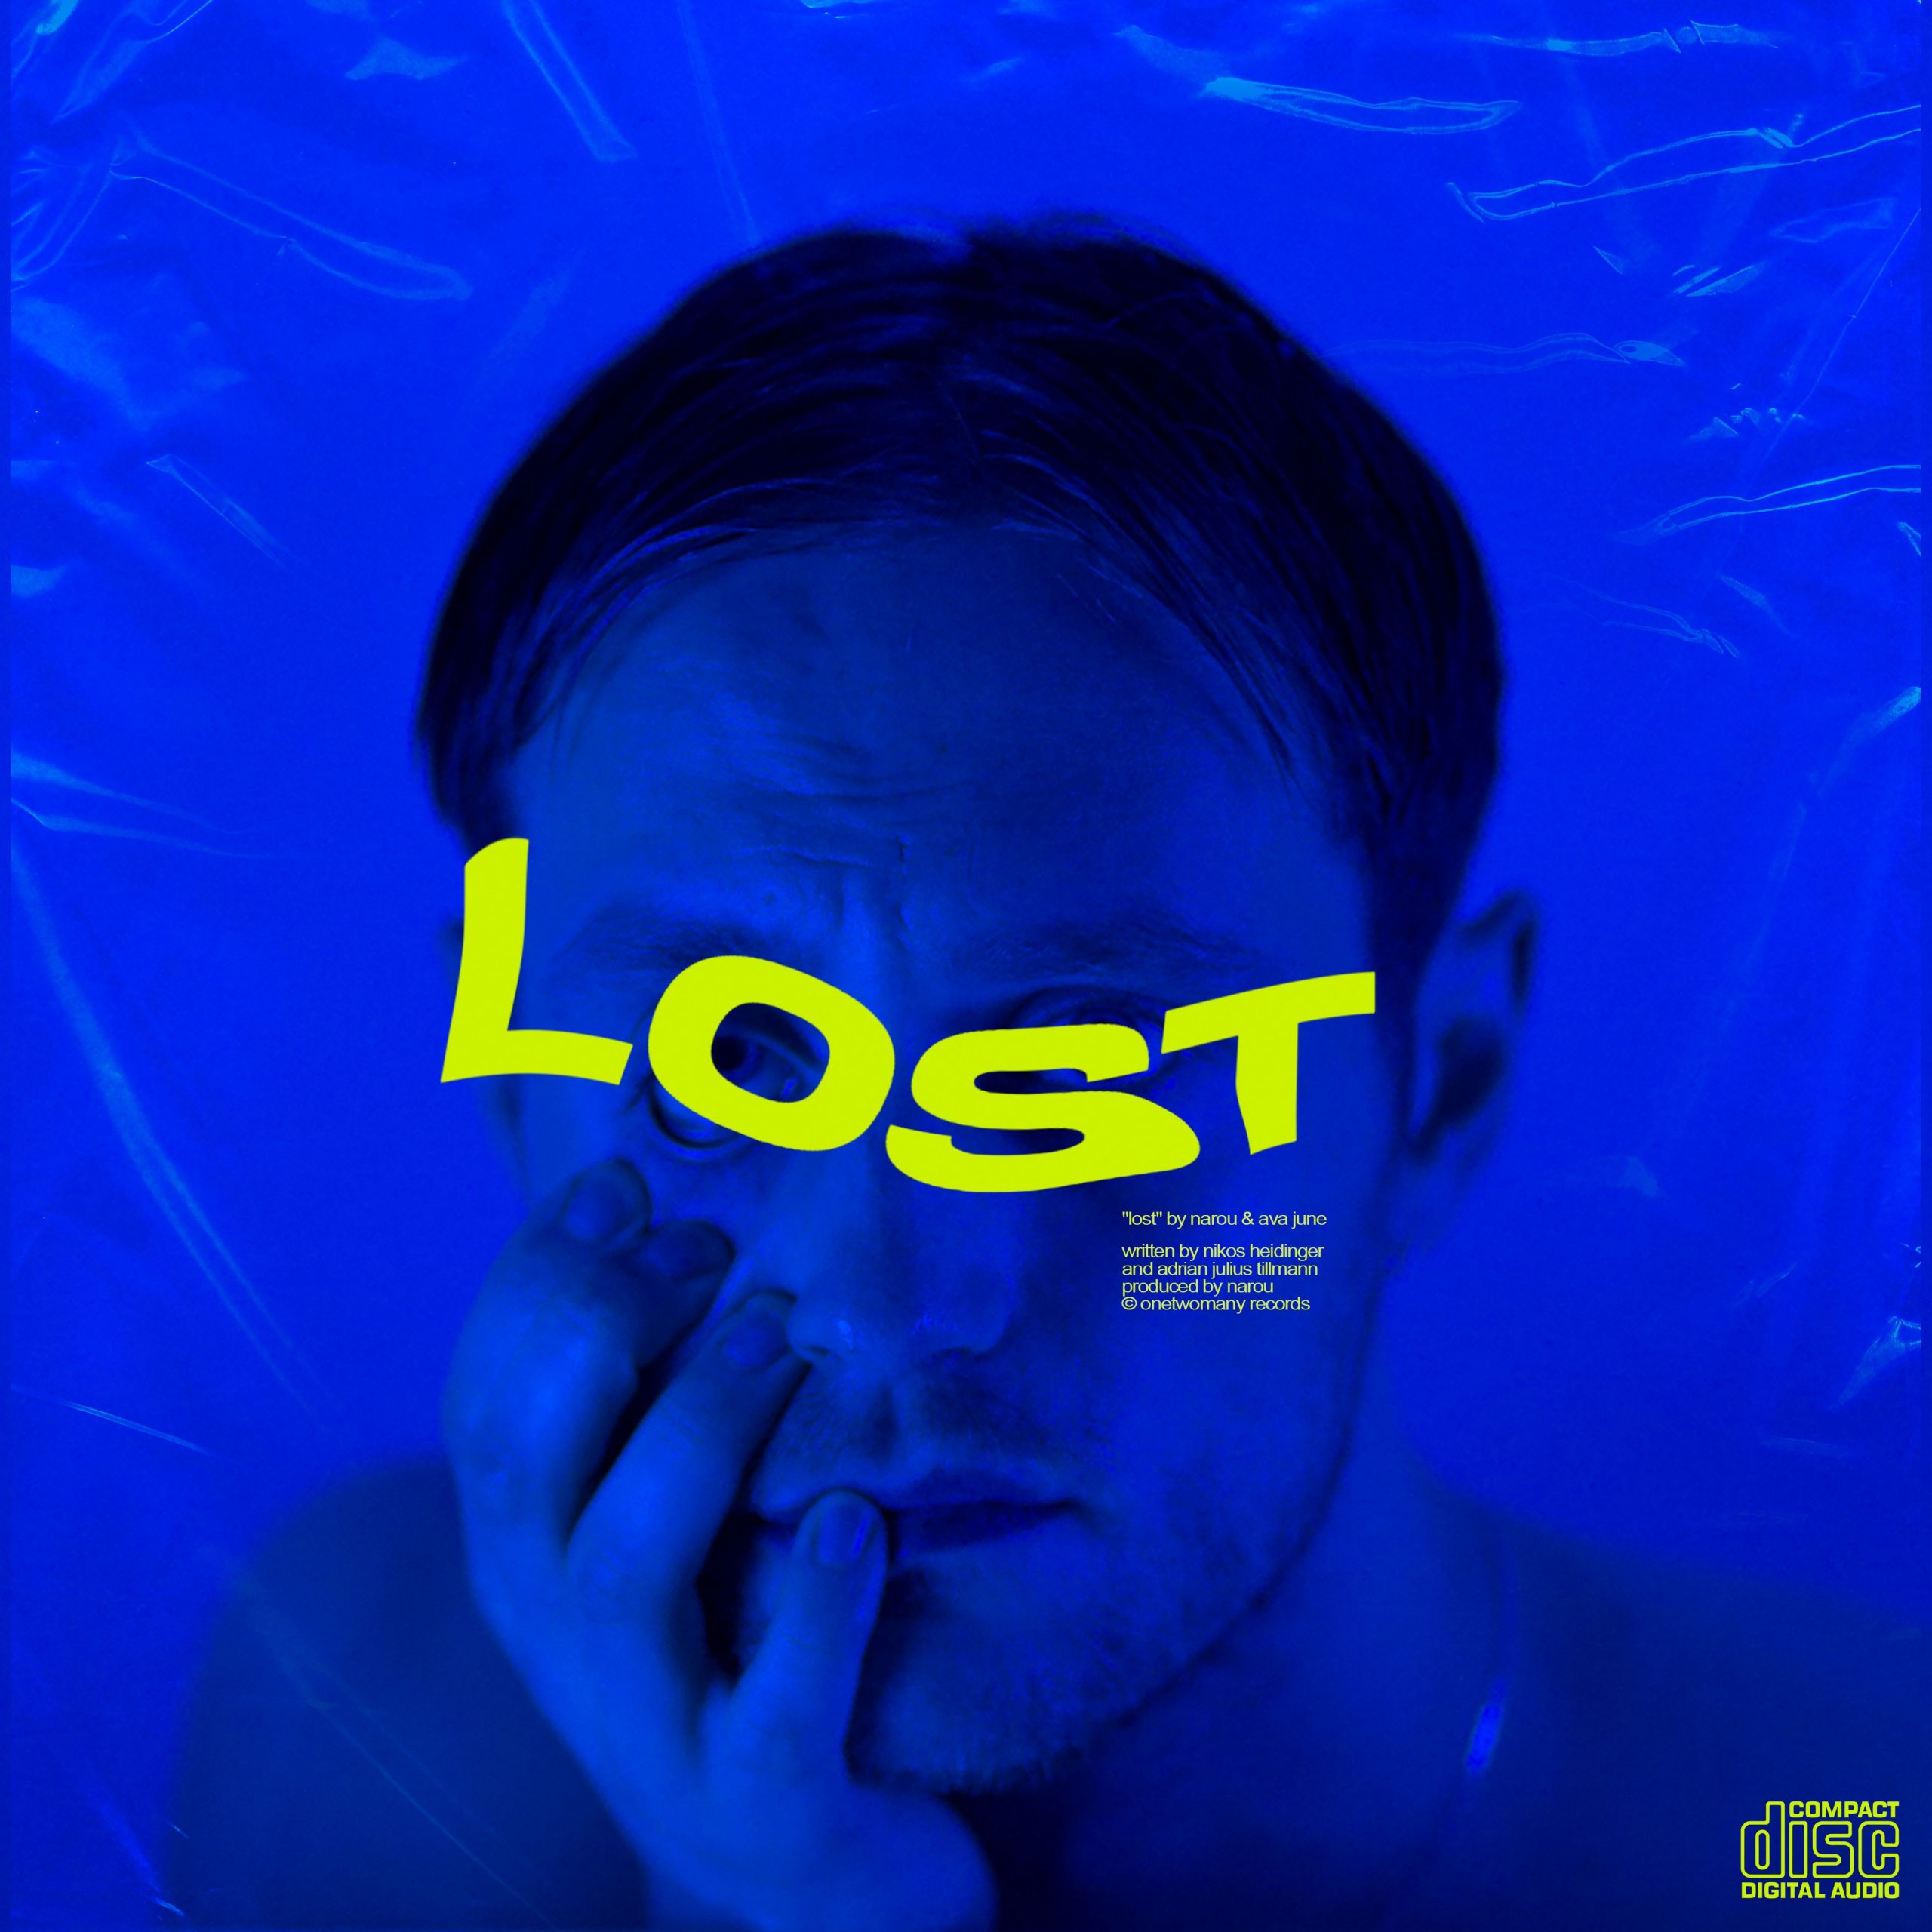 lost - ava june - narou - germany - indie - indie music - indie pop - indie rock - indie folk - new music - music blog - wolf in a suit - wolfinasuit - wolf in a suit blog - wolf in a suit music blog